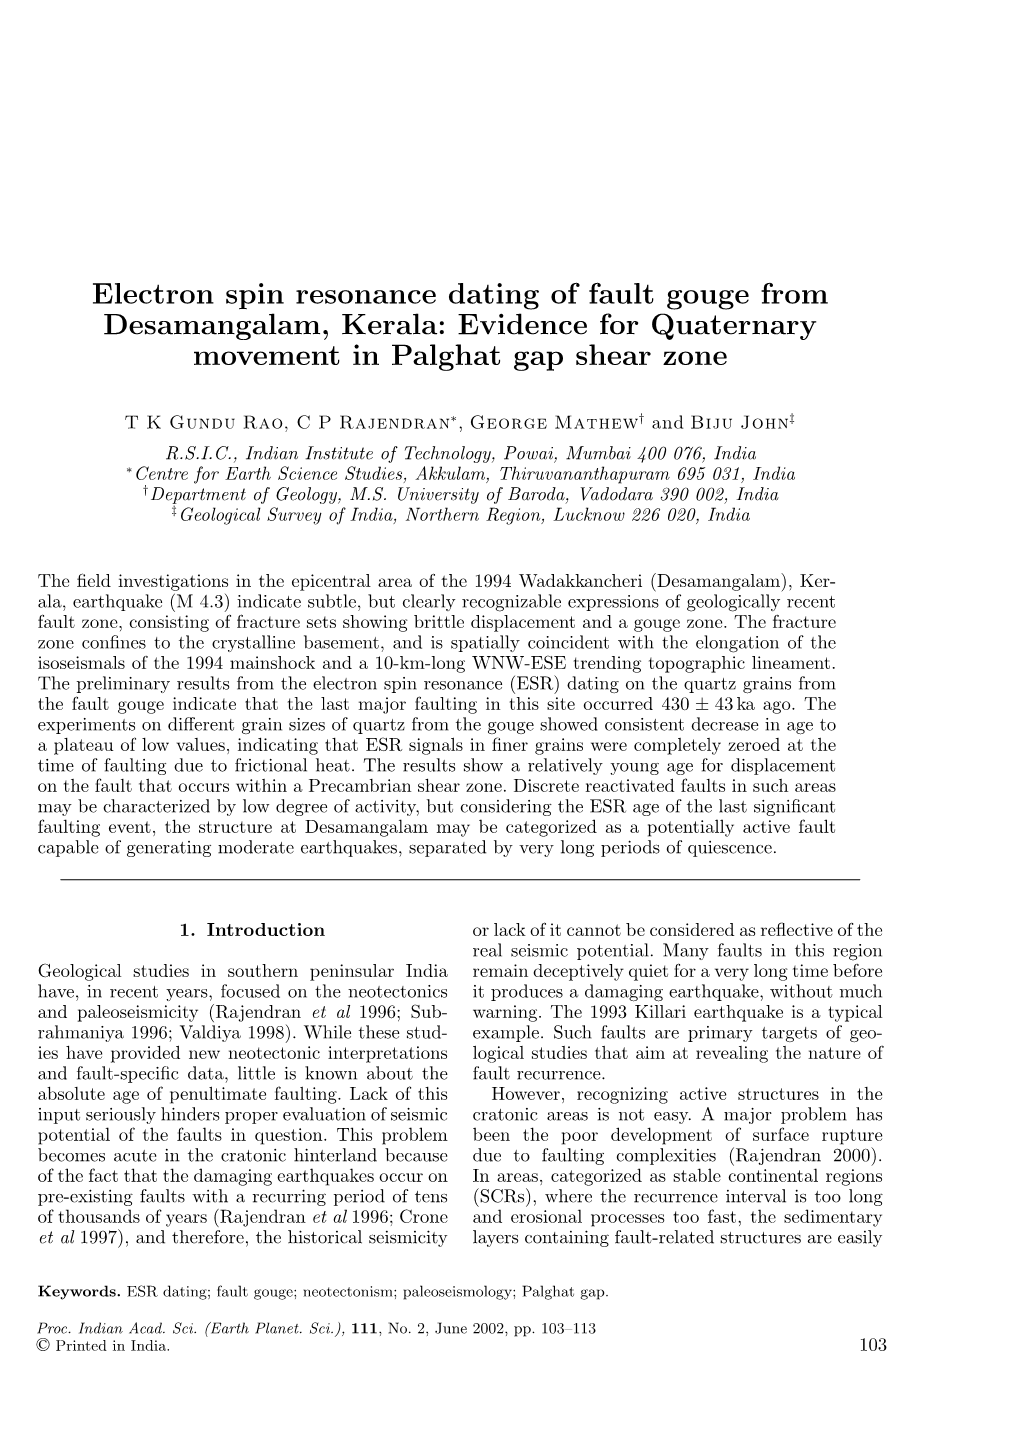 Electron Spin Resonance Dating of Fault Gouge from Desamangalam, Kerala: Evidence for Quaternary Movement in Palghat Gap Shear Zone